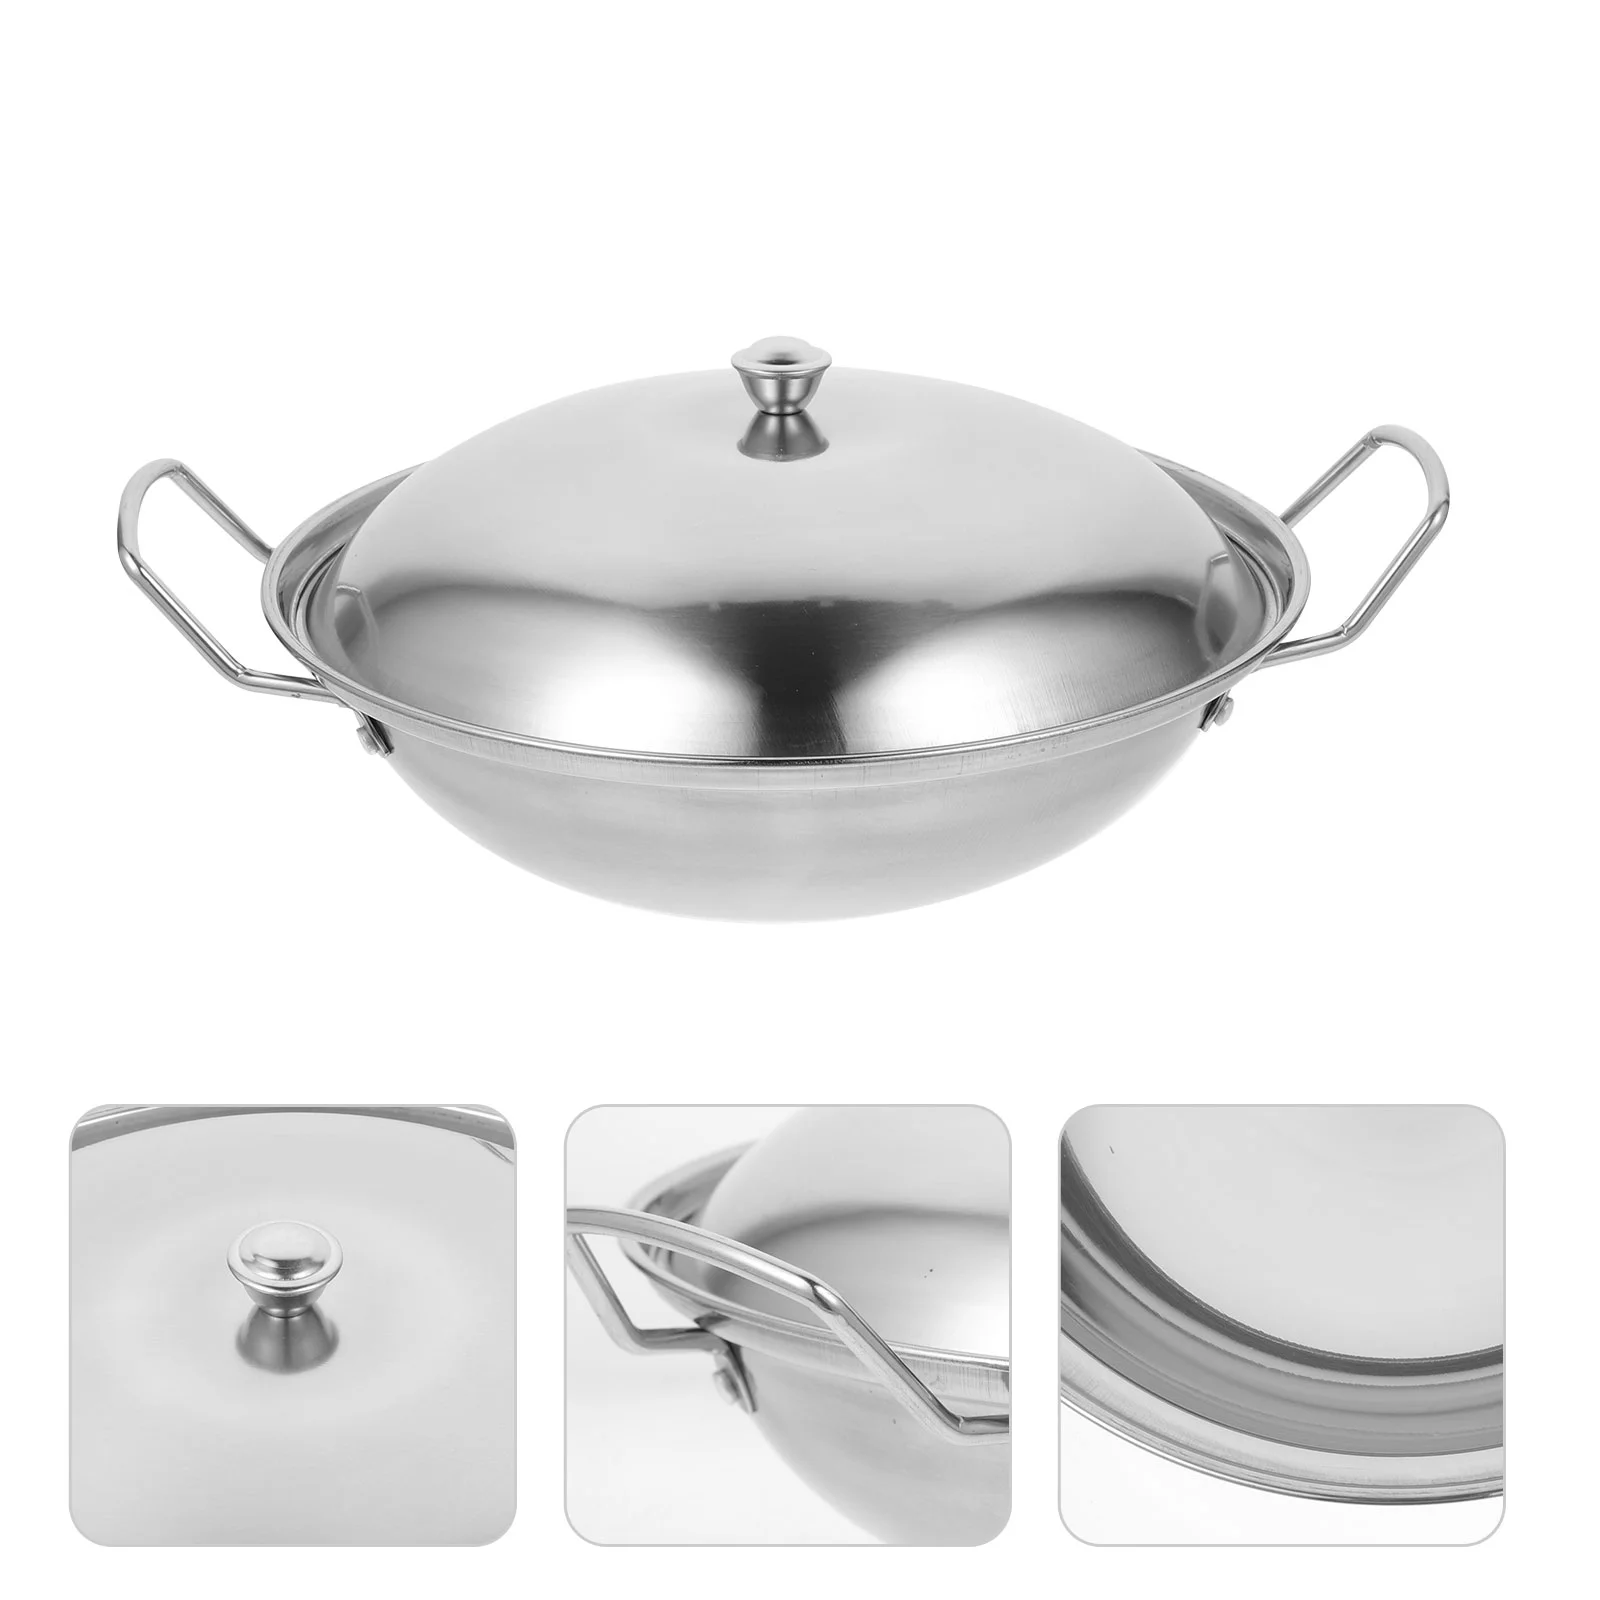 

Pan Wok Pot Steel Frying Stainless Cooking Chinese Lid Fry Skillet Pans Stir Saute Stock Hot Stick Woks Non Pow Griddle Omelet